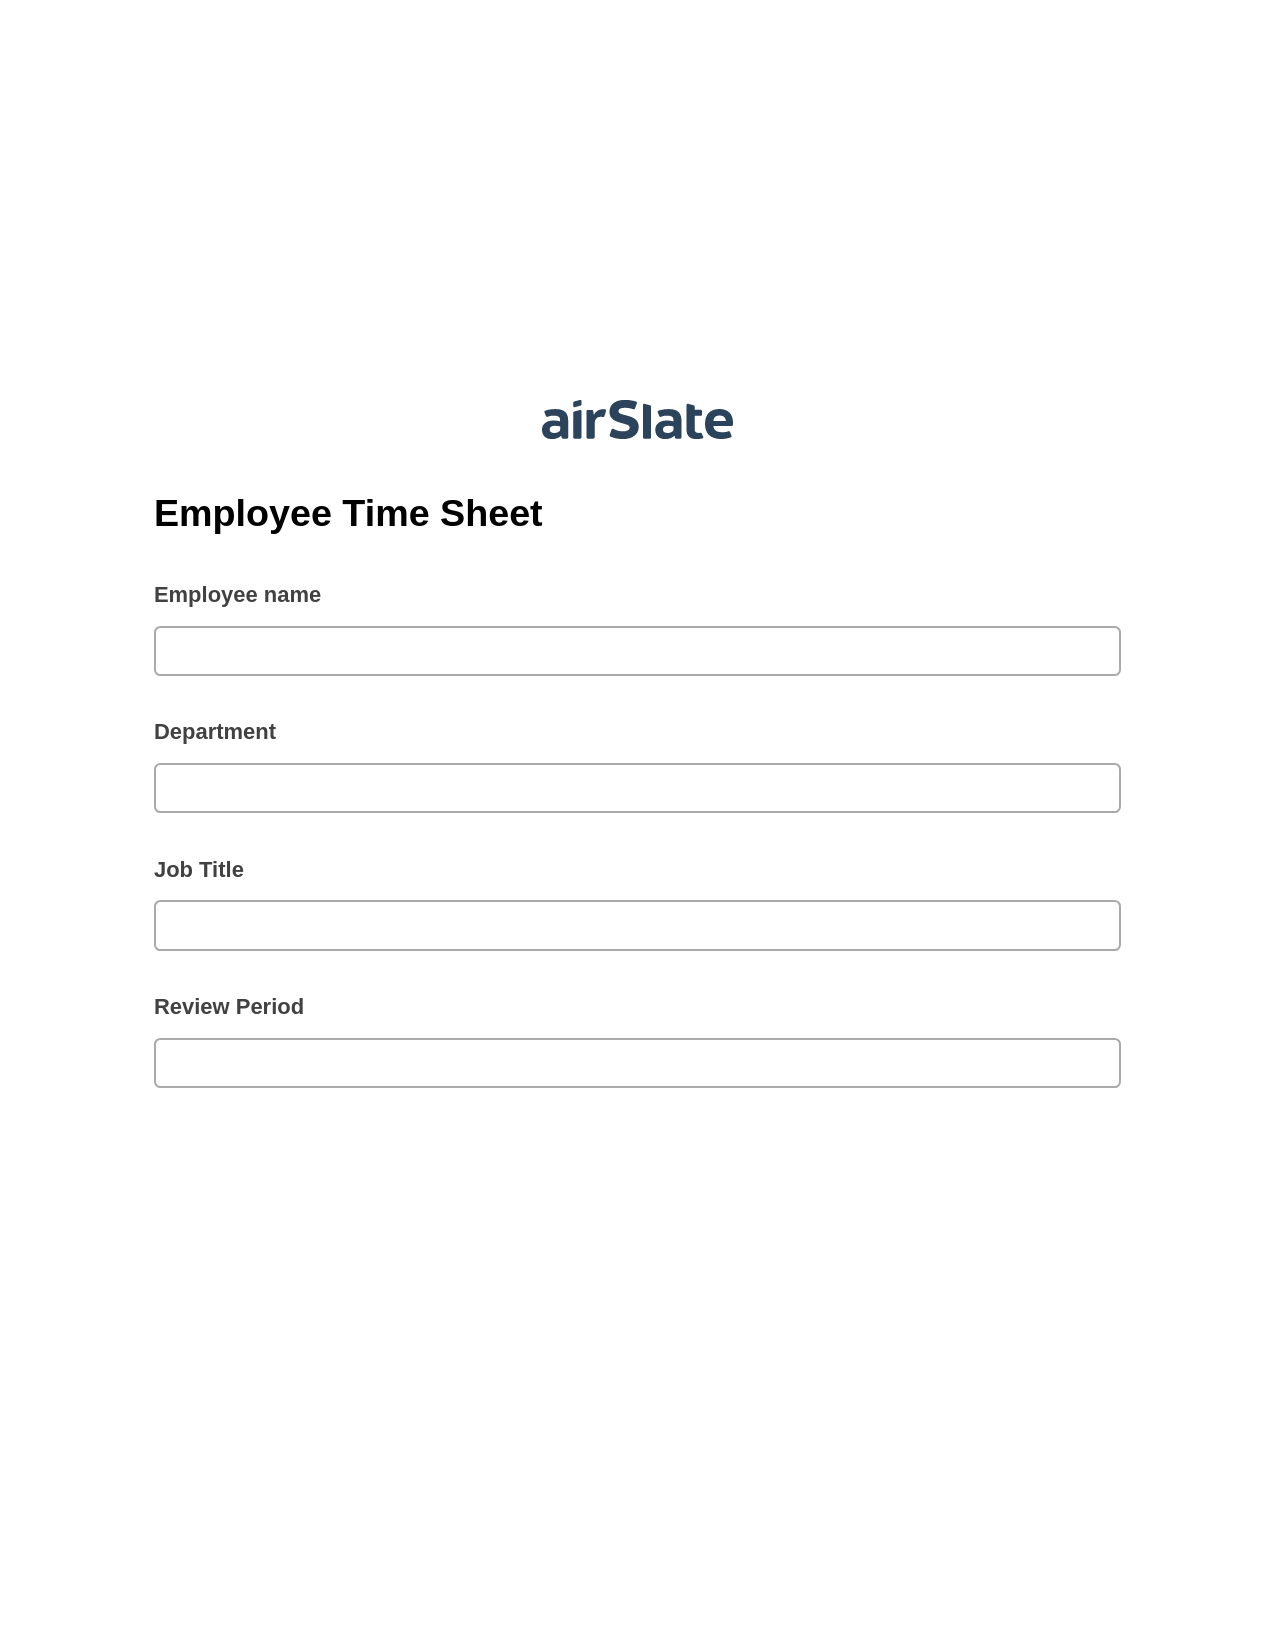 Employee Time Sheet Prefill from NetSuite records, Create slate addon, Export to Google Sheet Bot